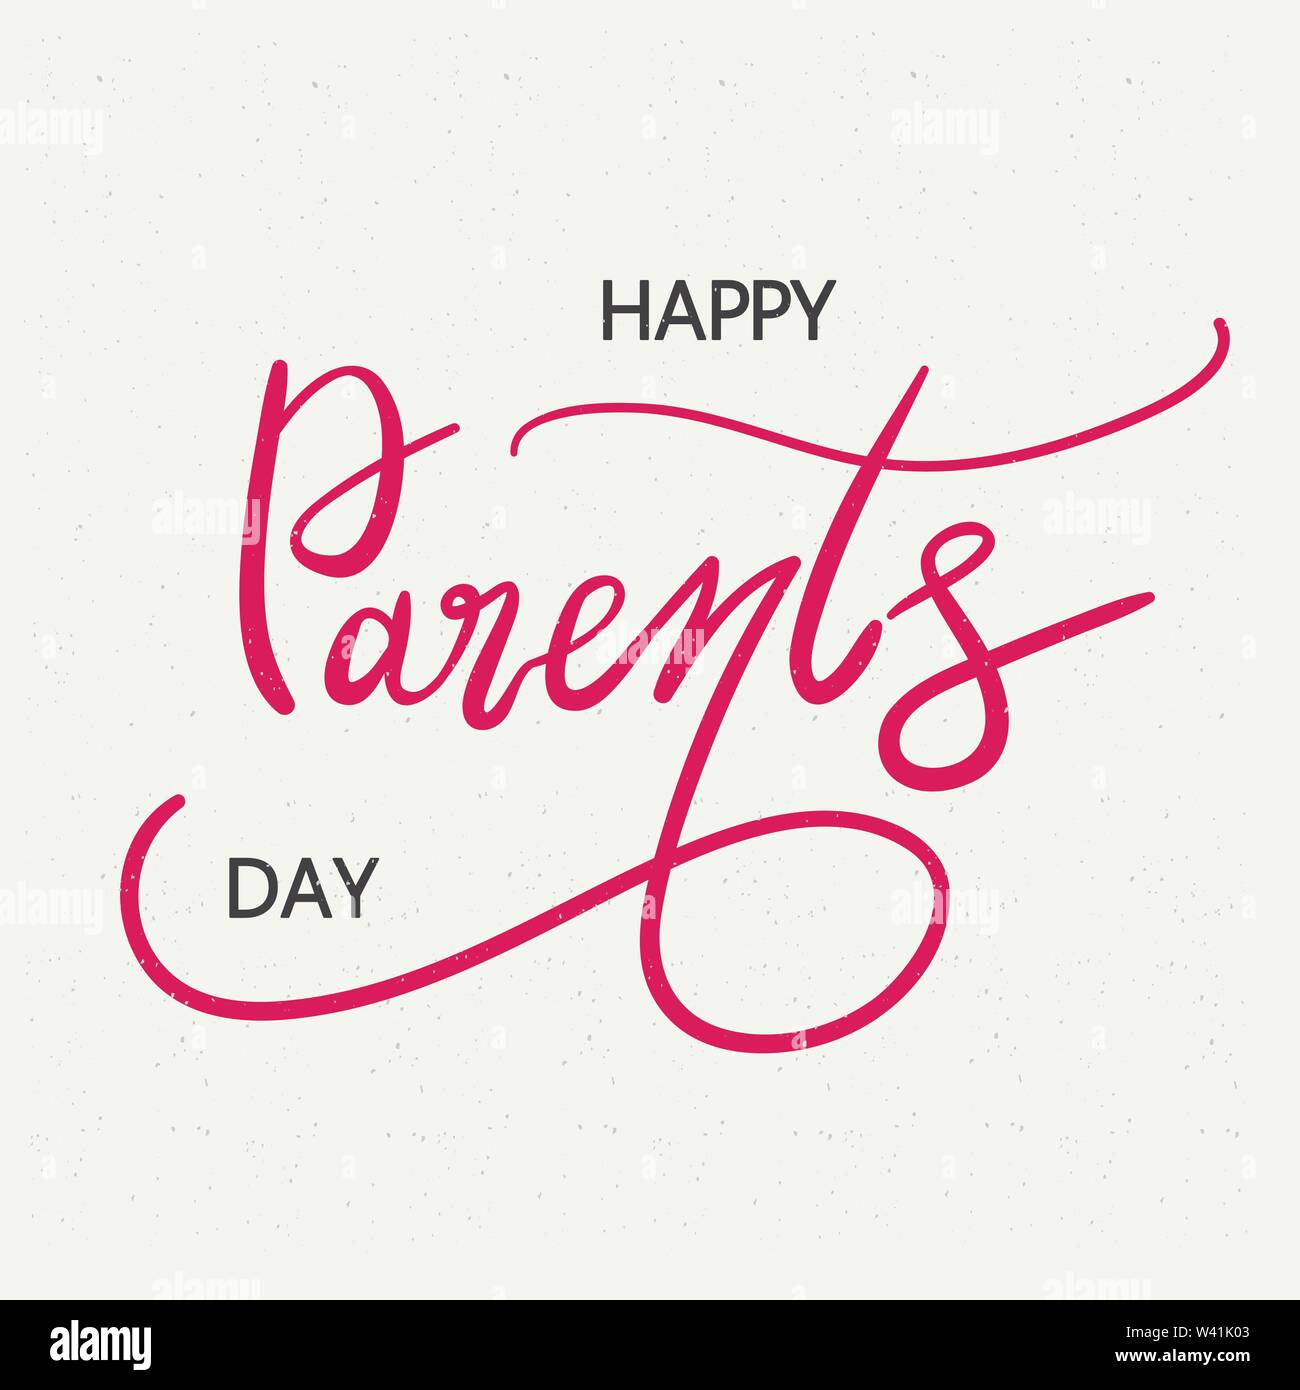 Happy parents day typography by write hand vector text on white background graphic Stock Vector